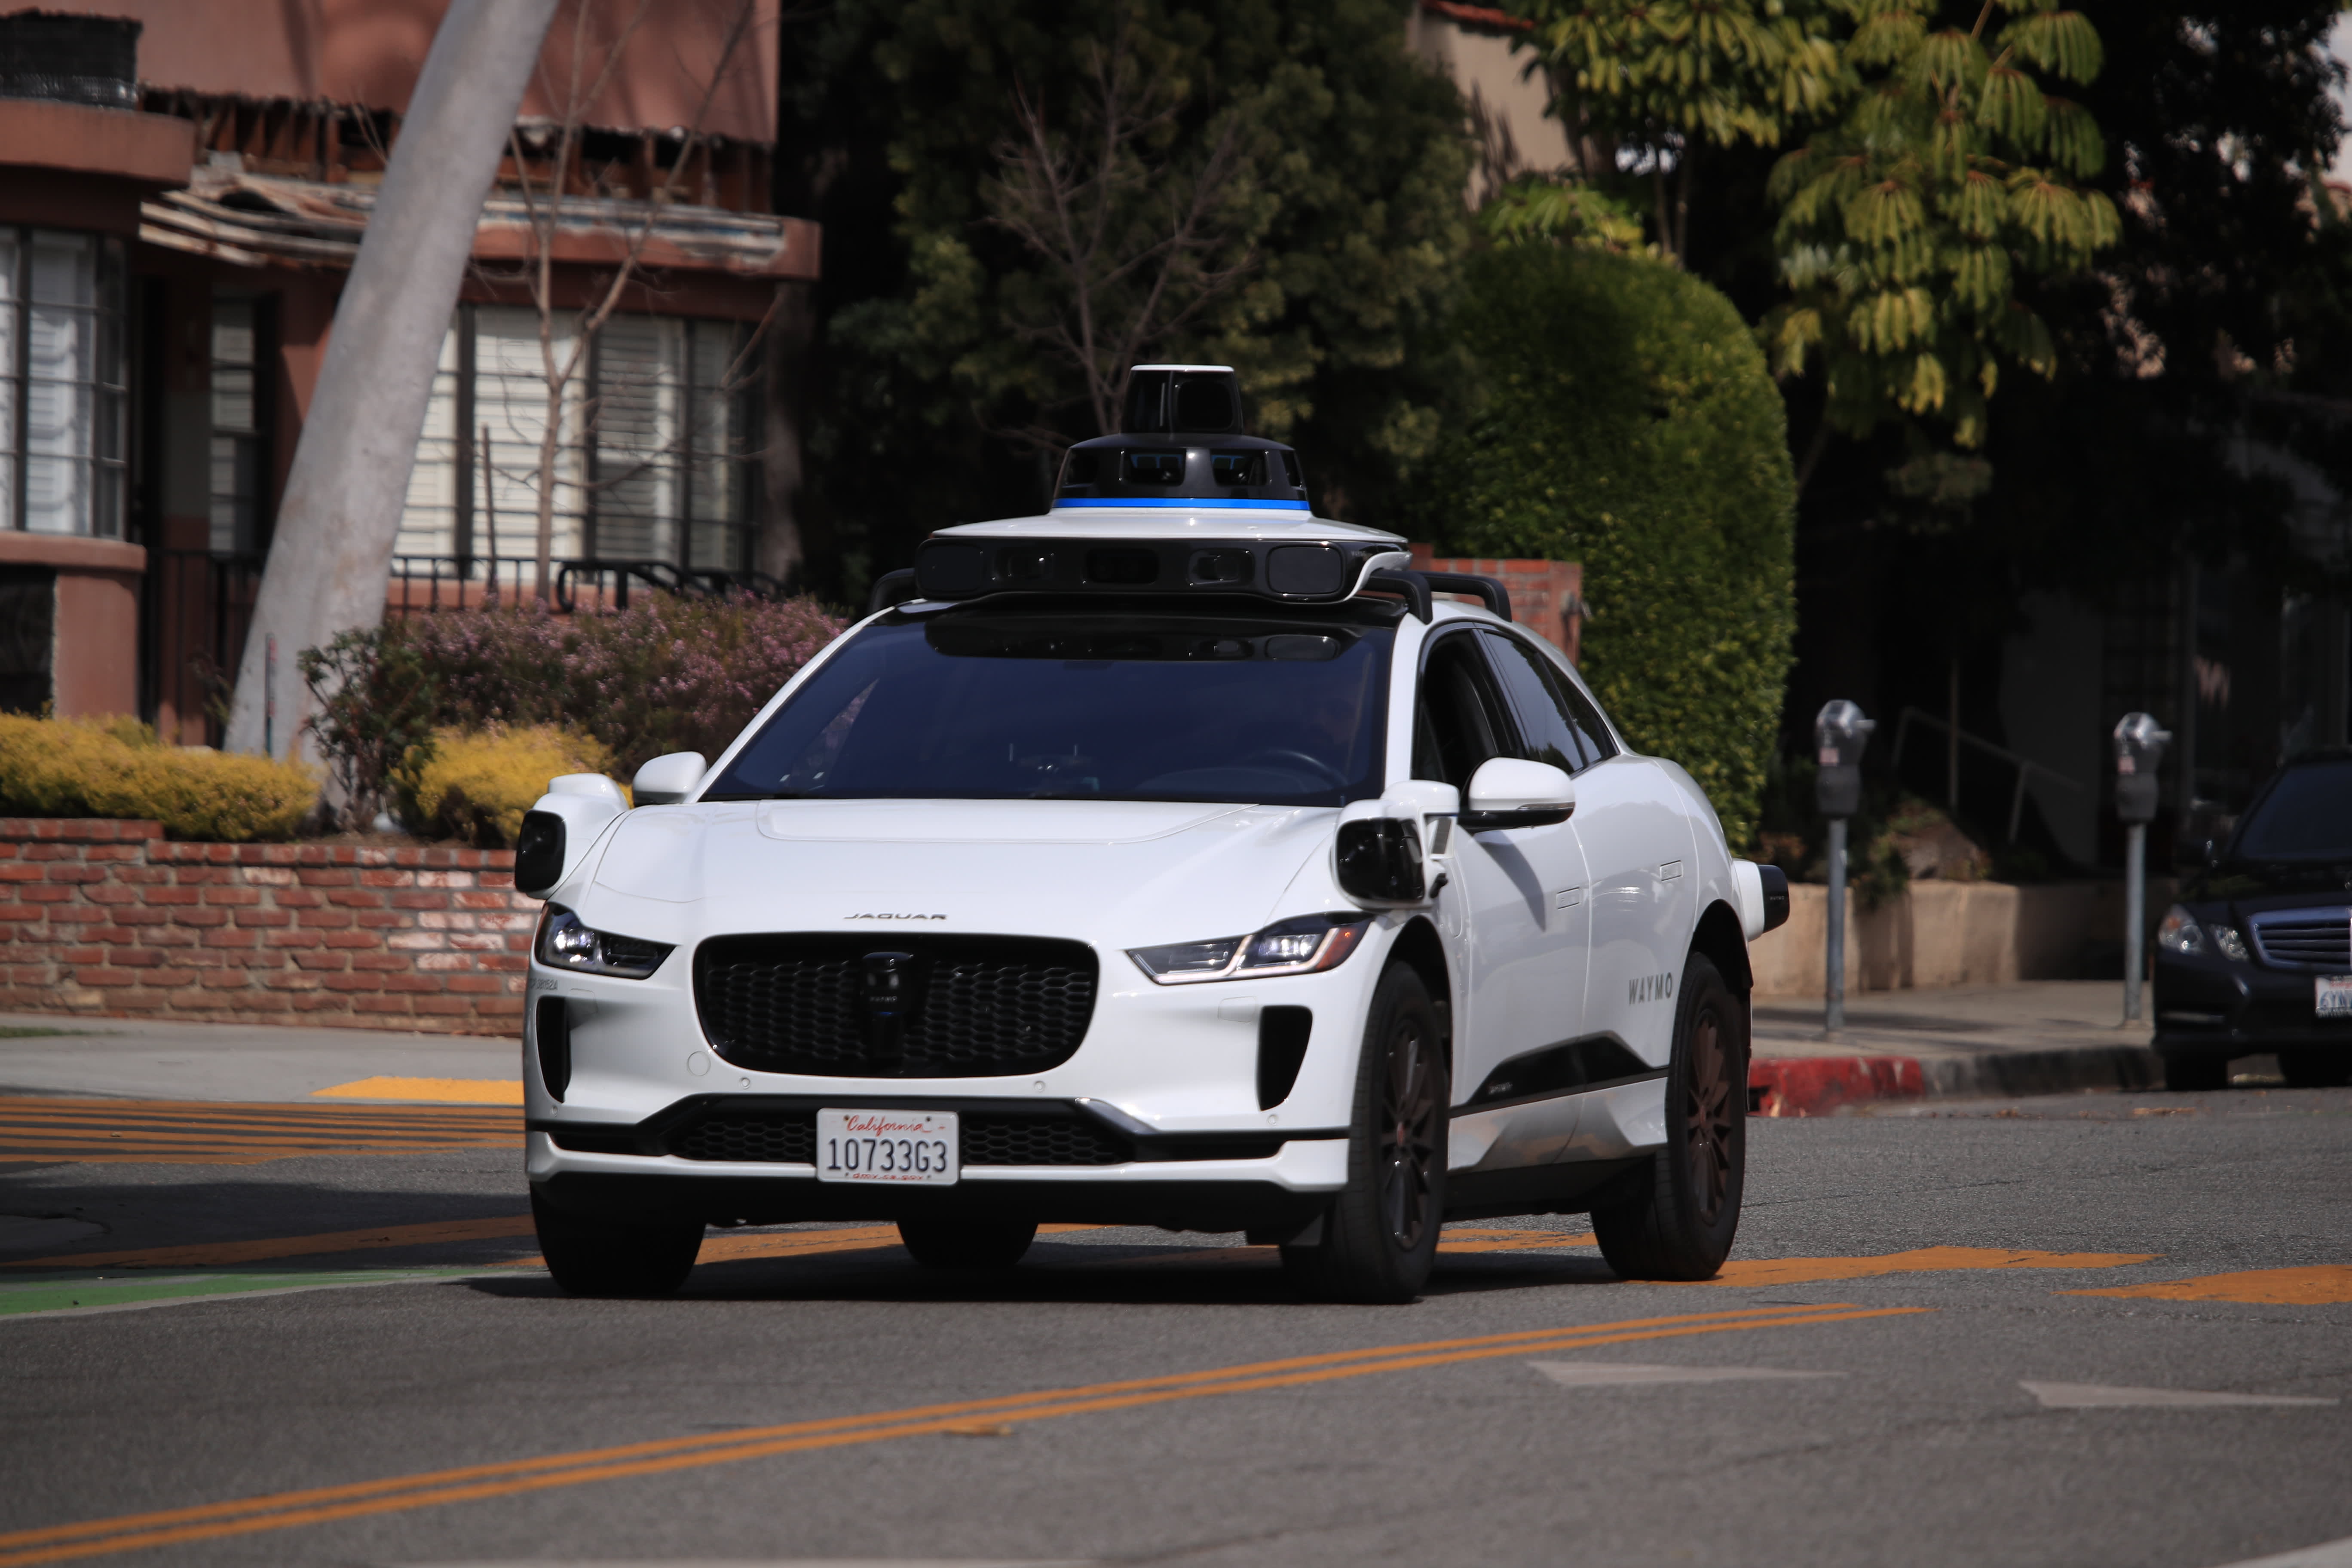 Uber Eats now uses Waymo's self-driving cars to offer driverless
deliveries